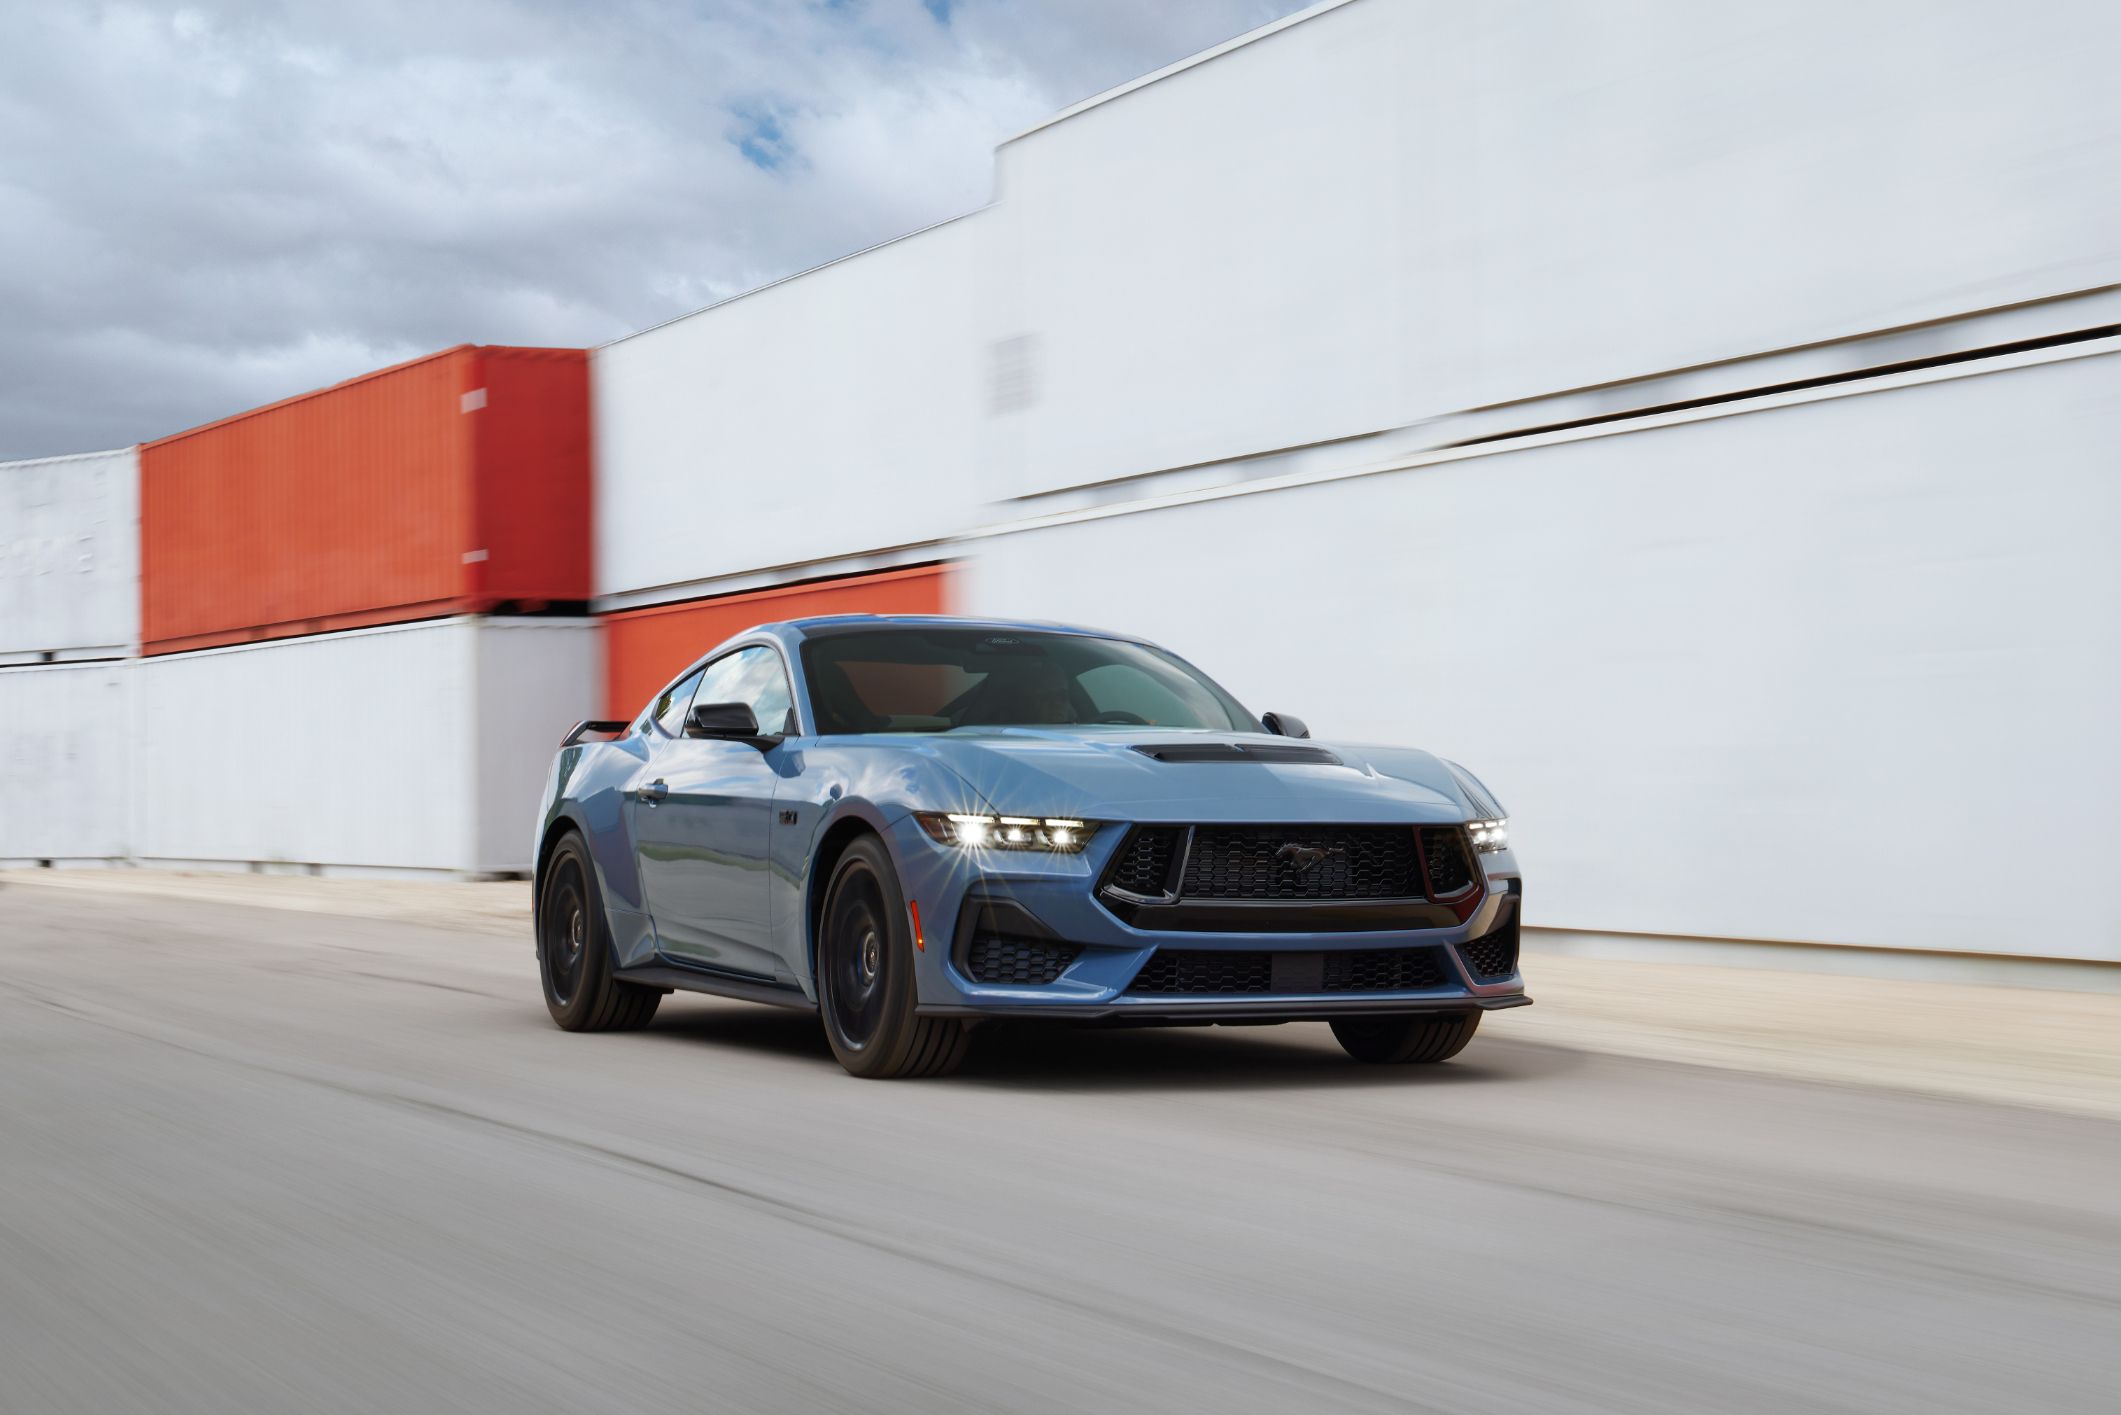 2024 Ford Mustang Isn’t Revolutionary, Just Better in Many Small Ways